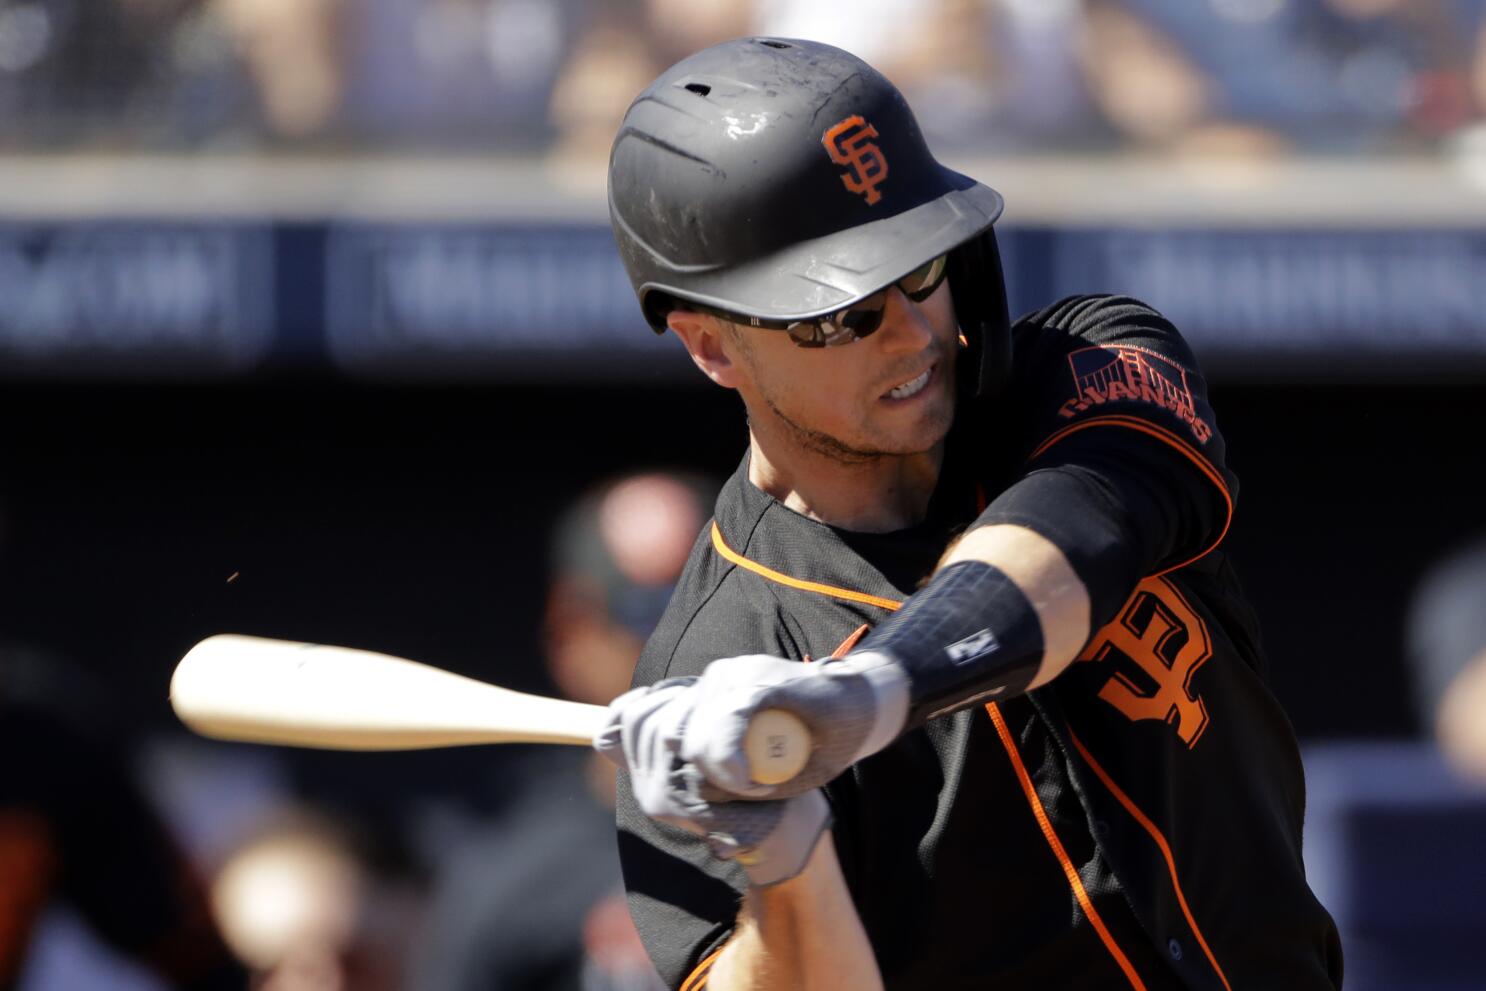 Buster Posey Opts Out Of MLB Season After The Births Of His Daughters